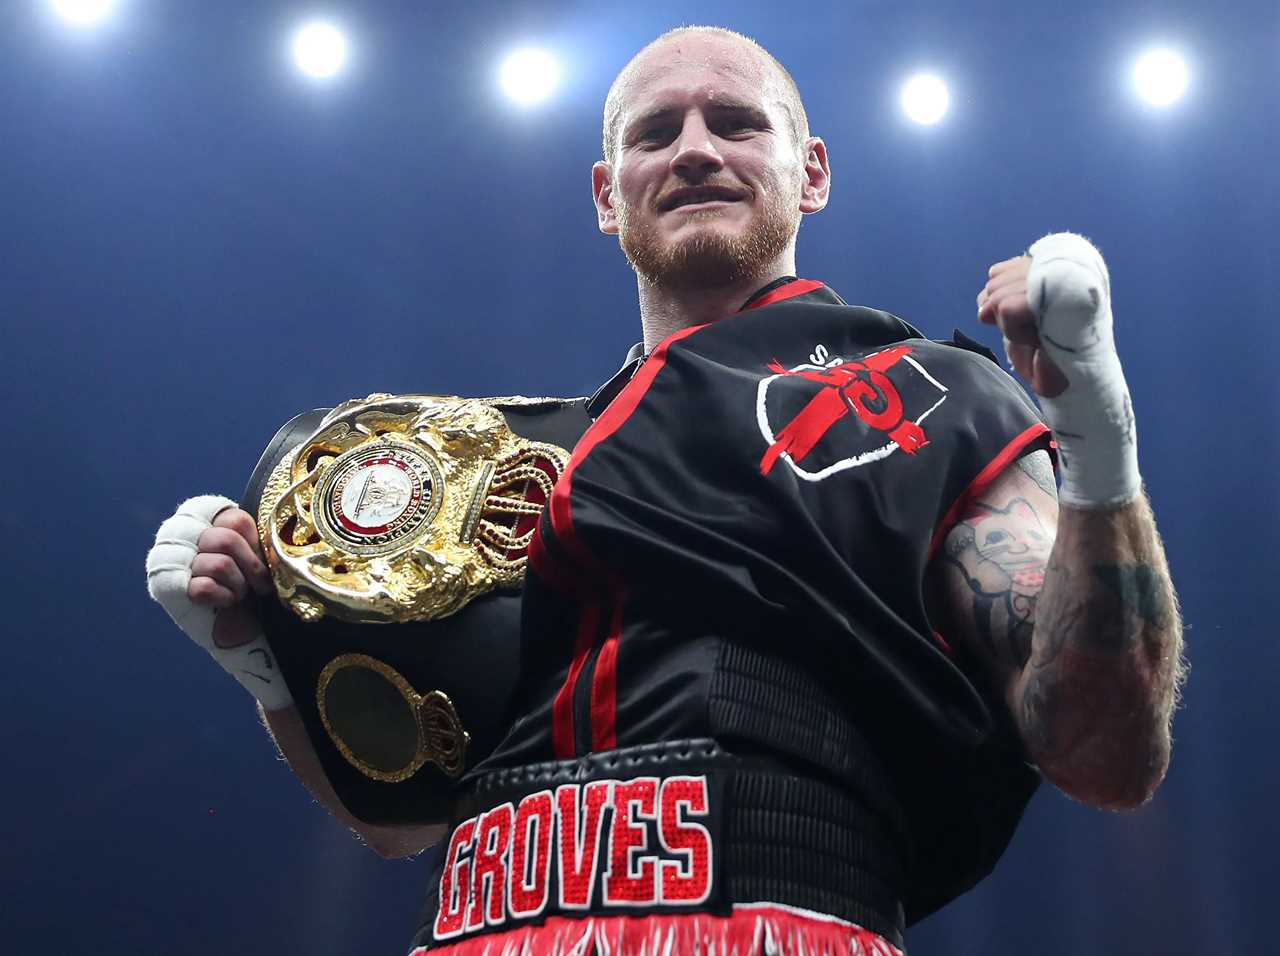 George Groves predicts that Tyson Fury will either rematch Francis Ngannou, or retire.